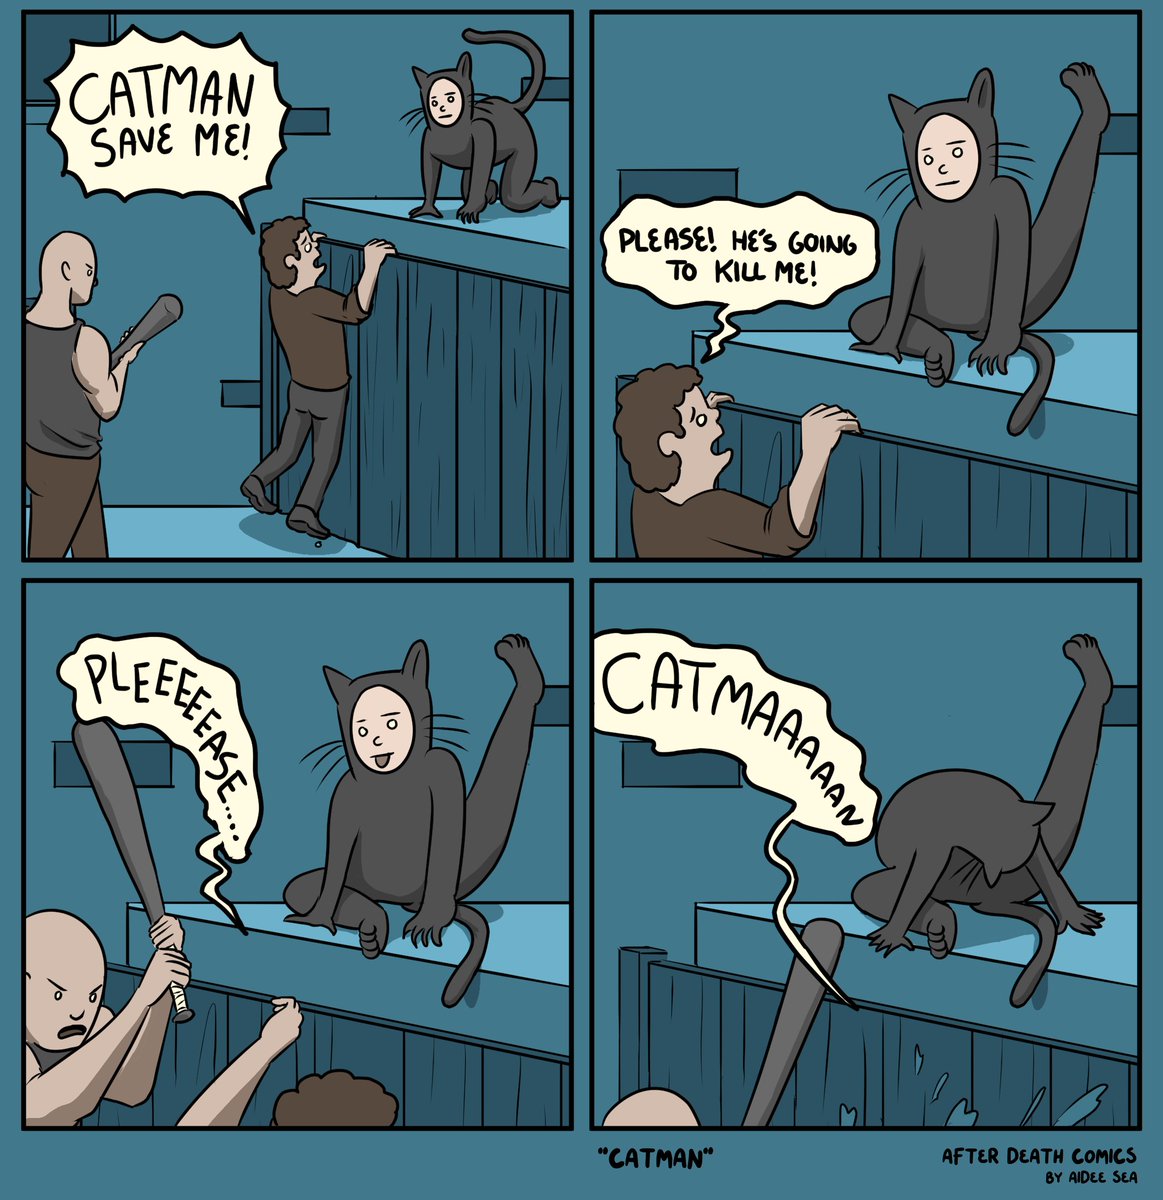 Catman sees you, he just doesn't care. #comics #cats #funny